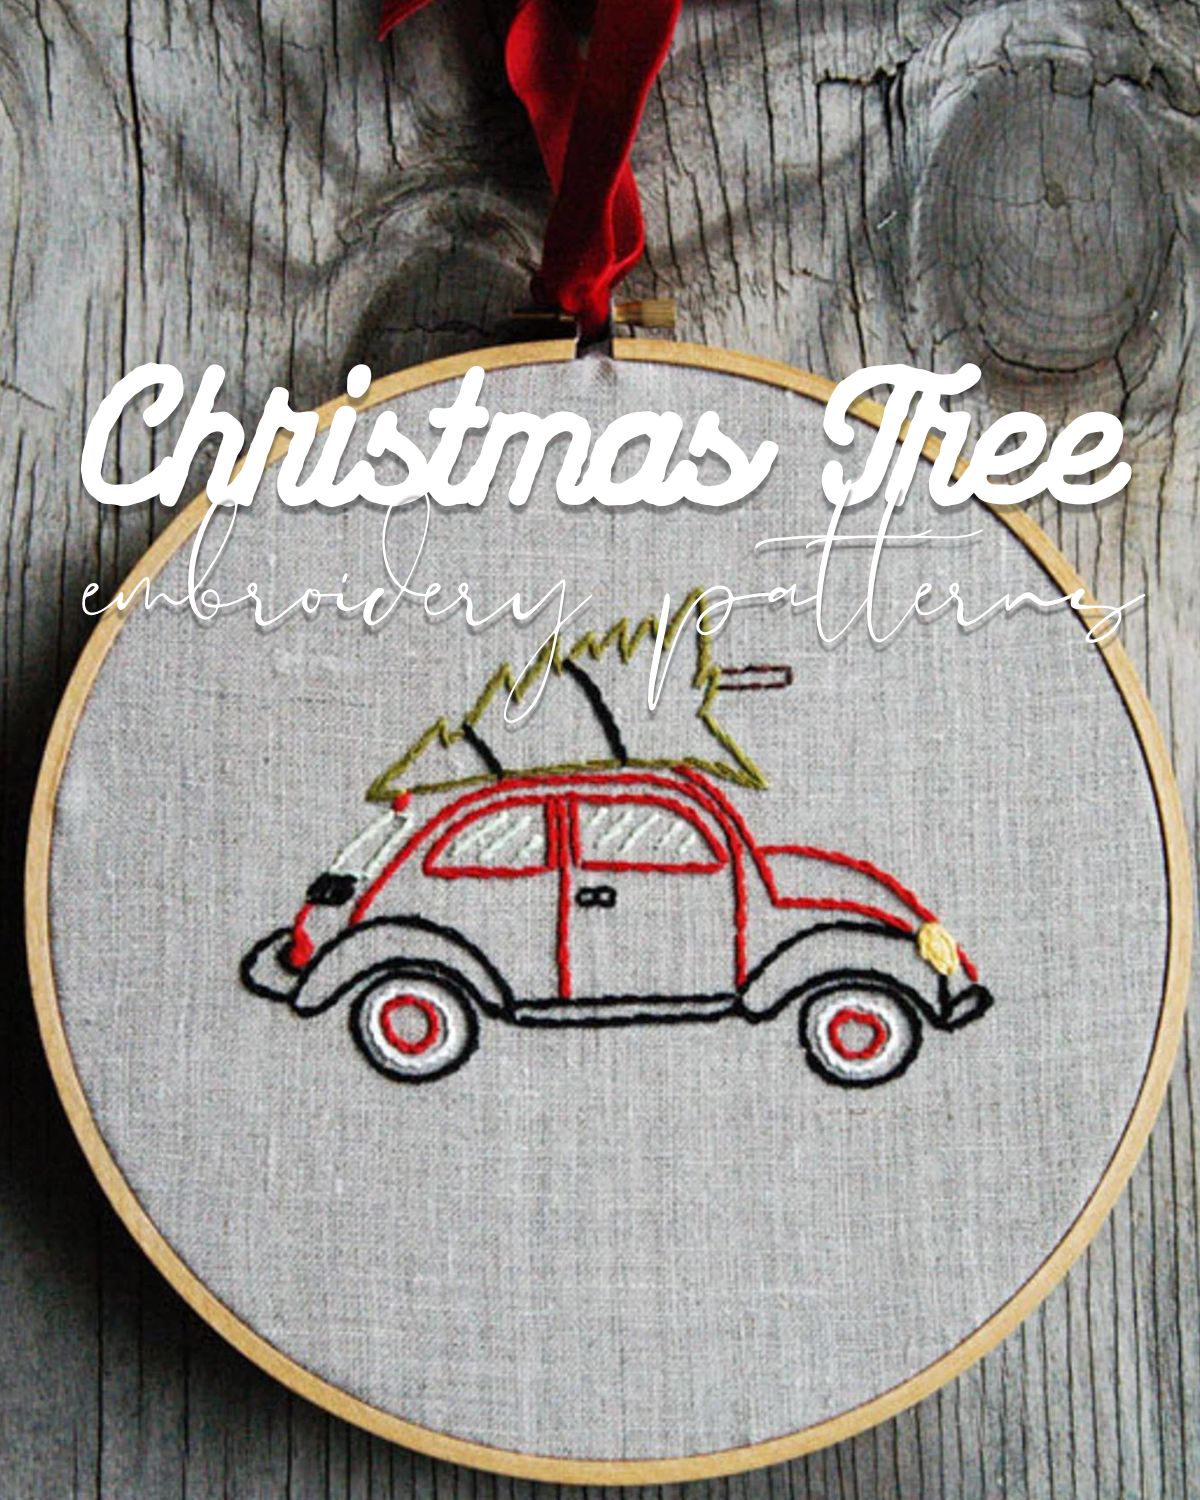 Embroidery hoop of the classic Christmas red car with a tree on top